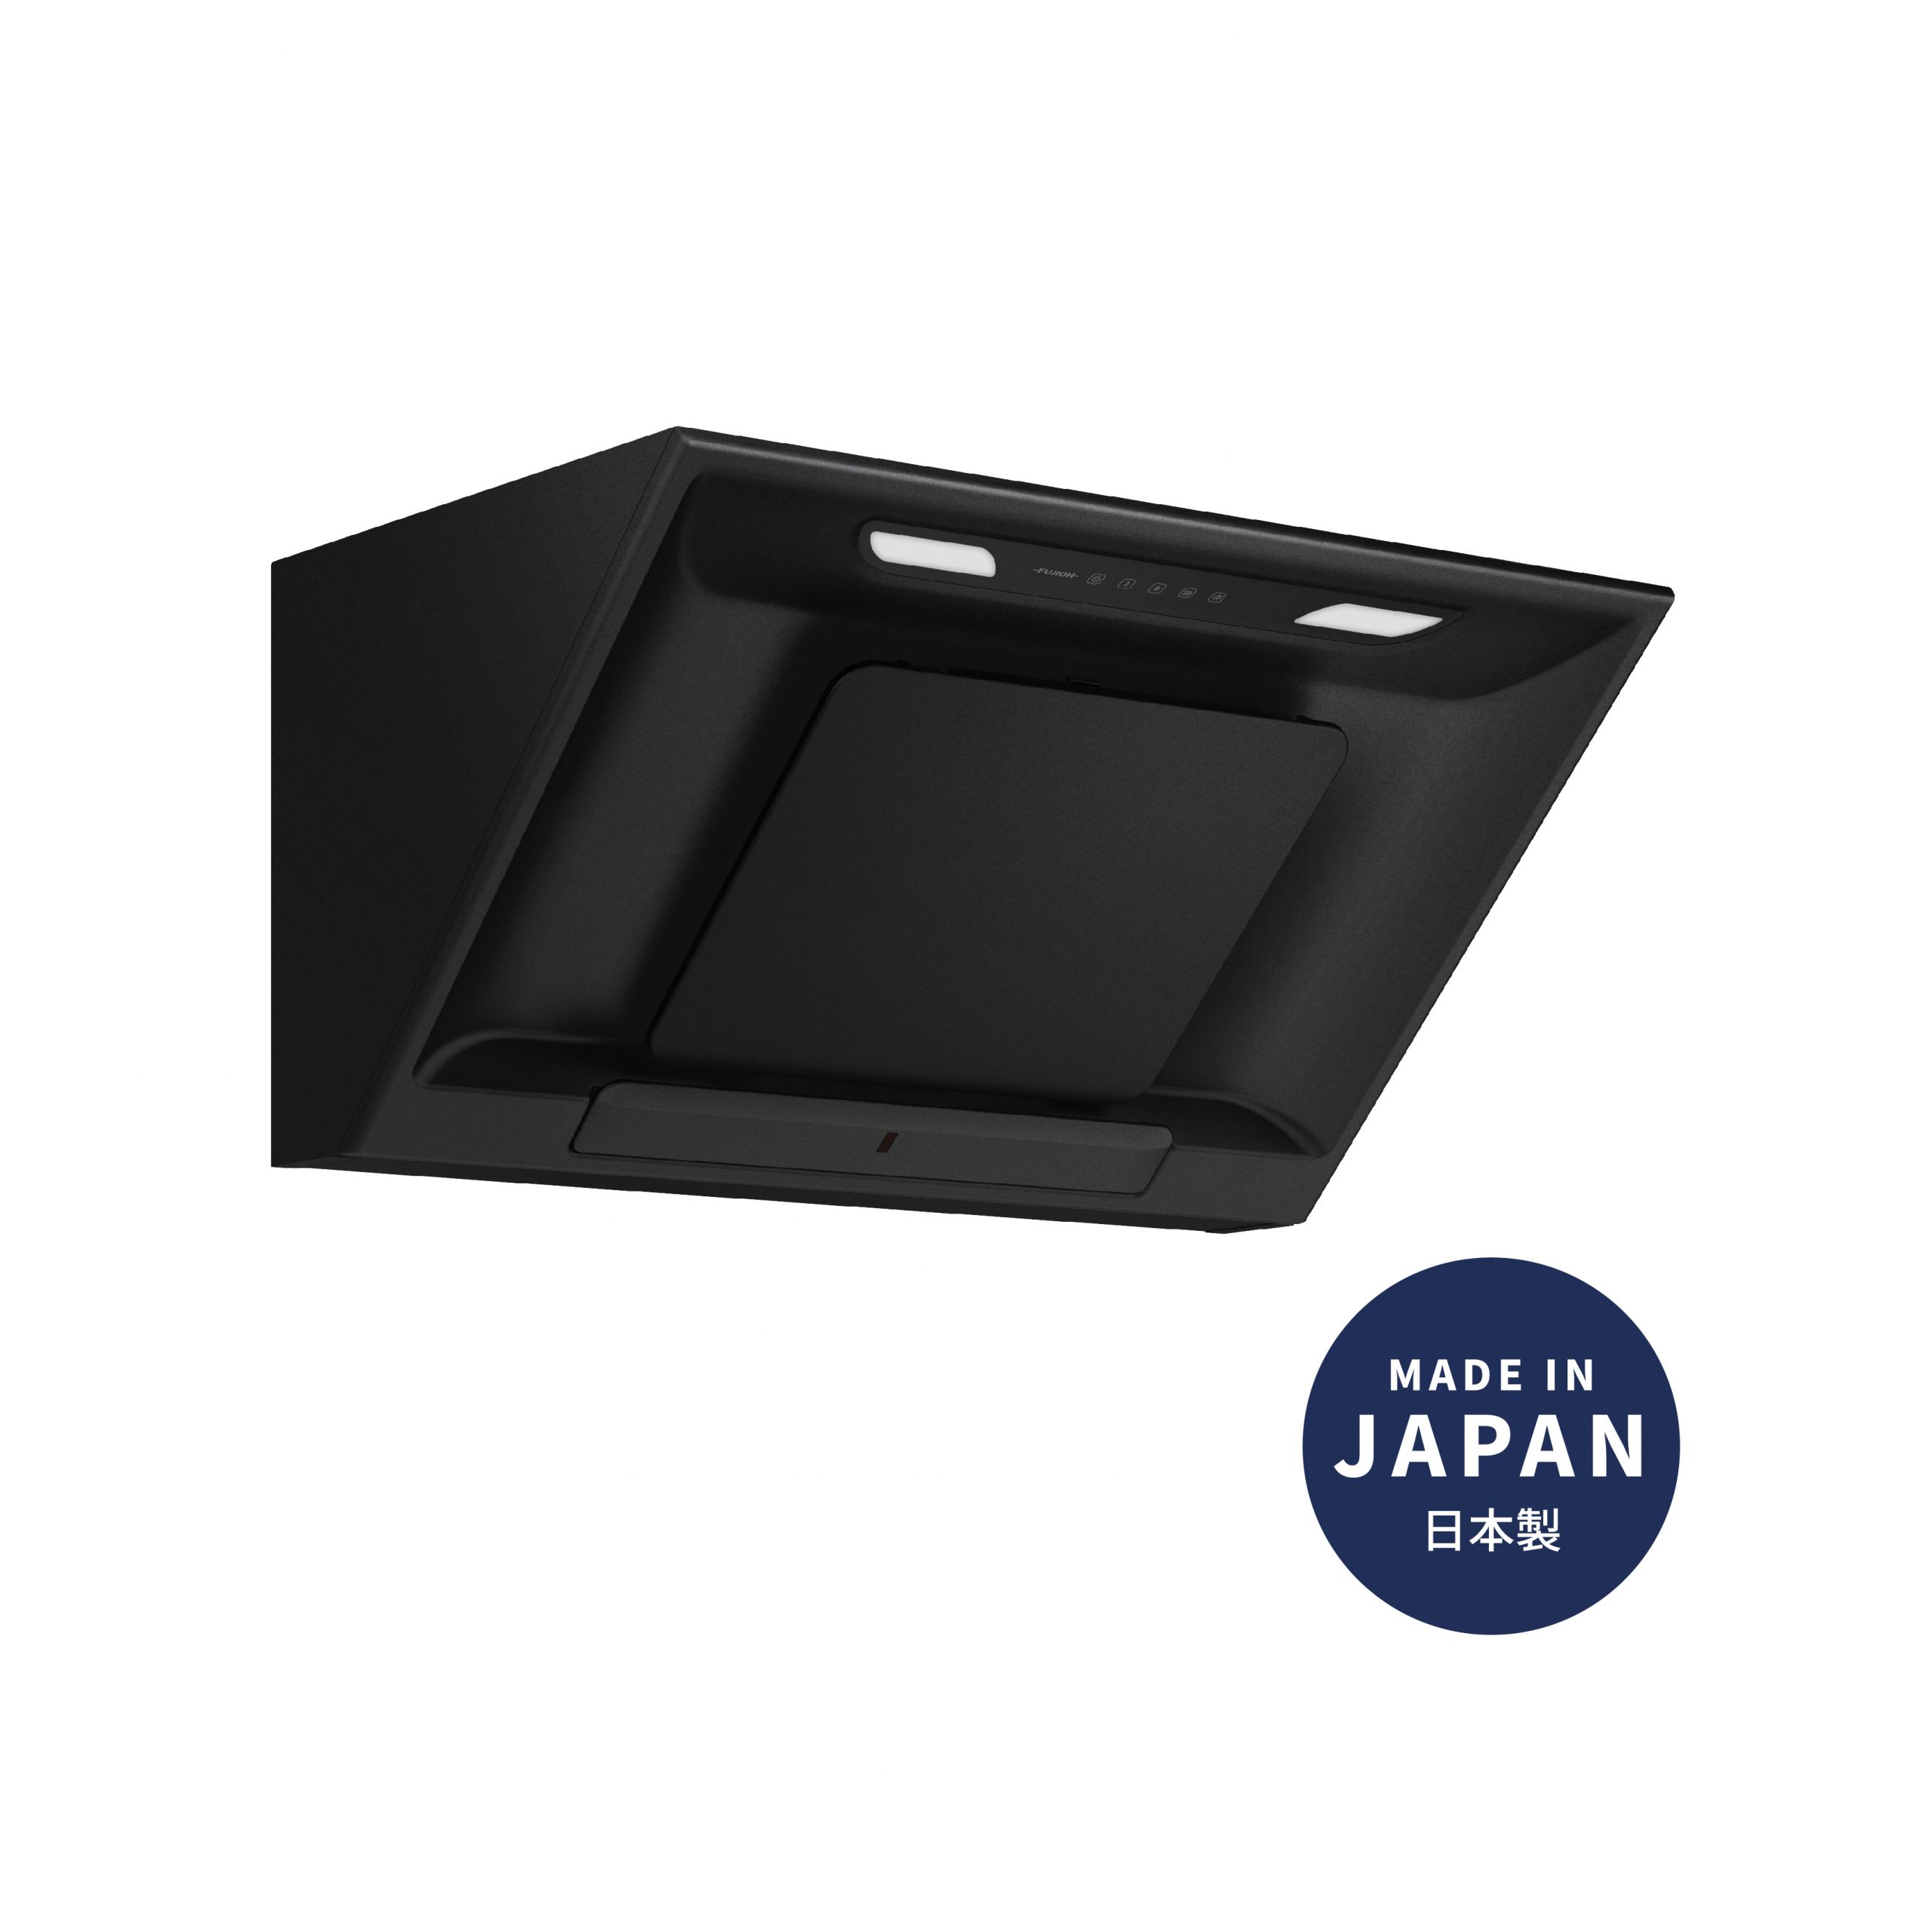 Made in Japan Inclined Design Cooker Hood